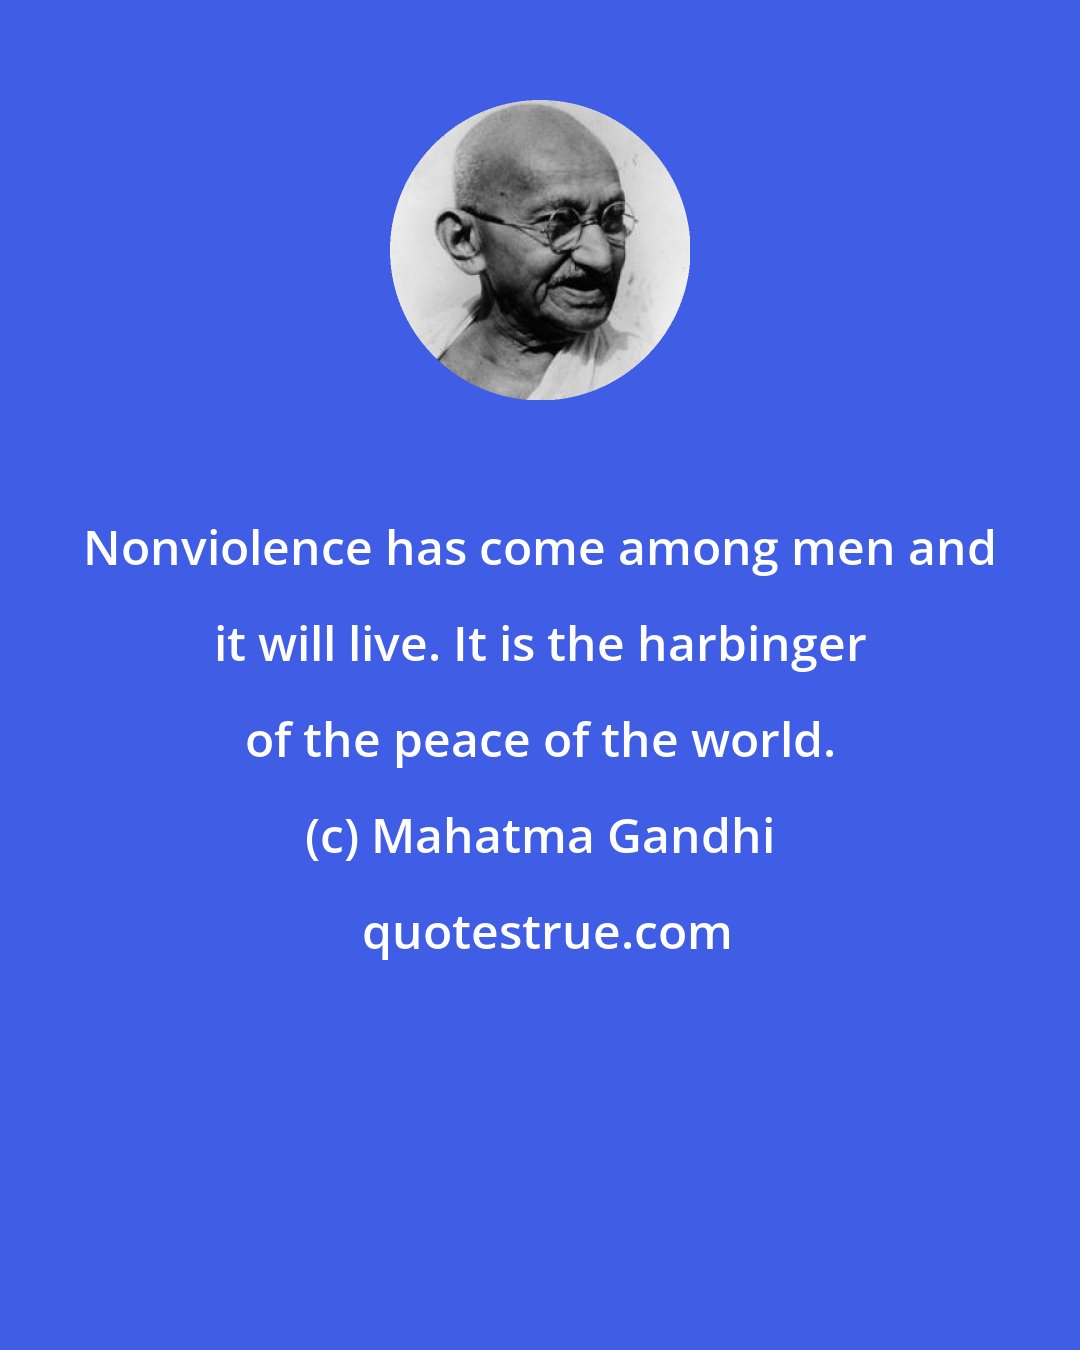 Mahatma Gandhi: Nonviolence has come among men and it will live. It is the harbinger of the peace of the world.